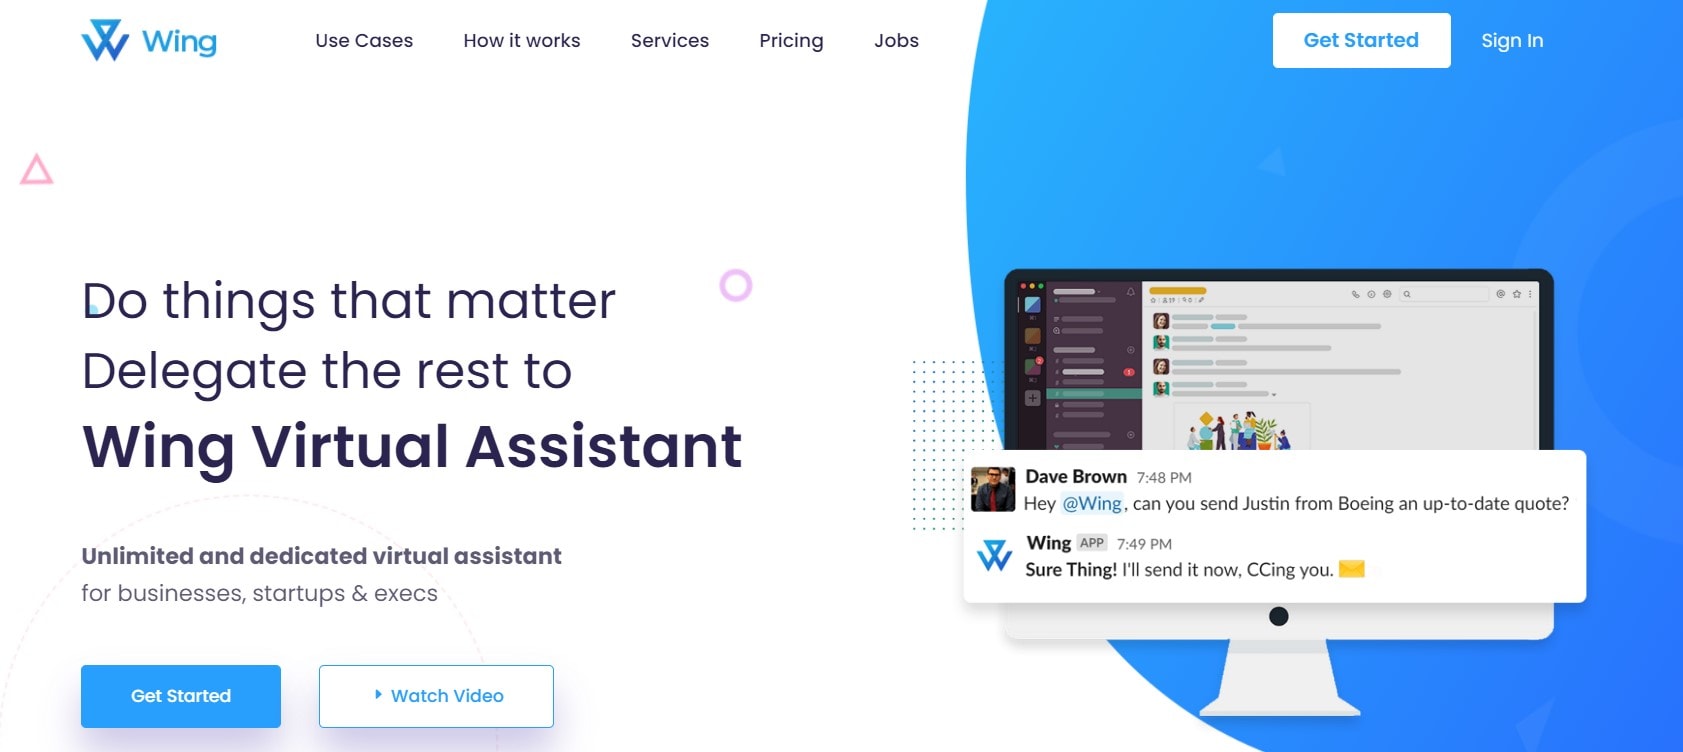 Virtual Assistant Companies For Startups: Wing Assistant